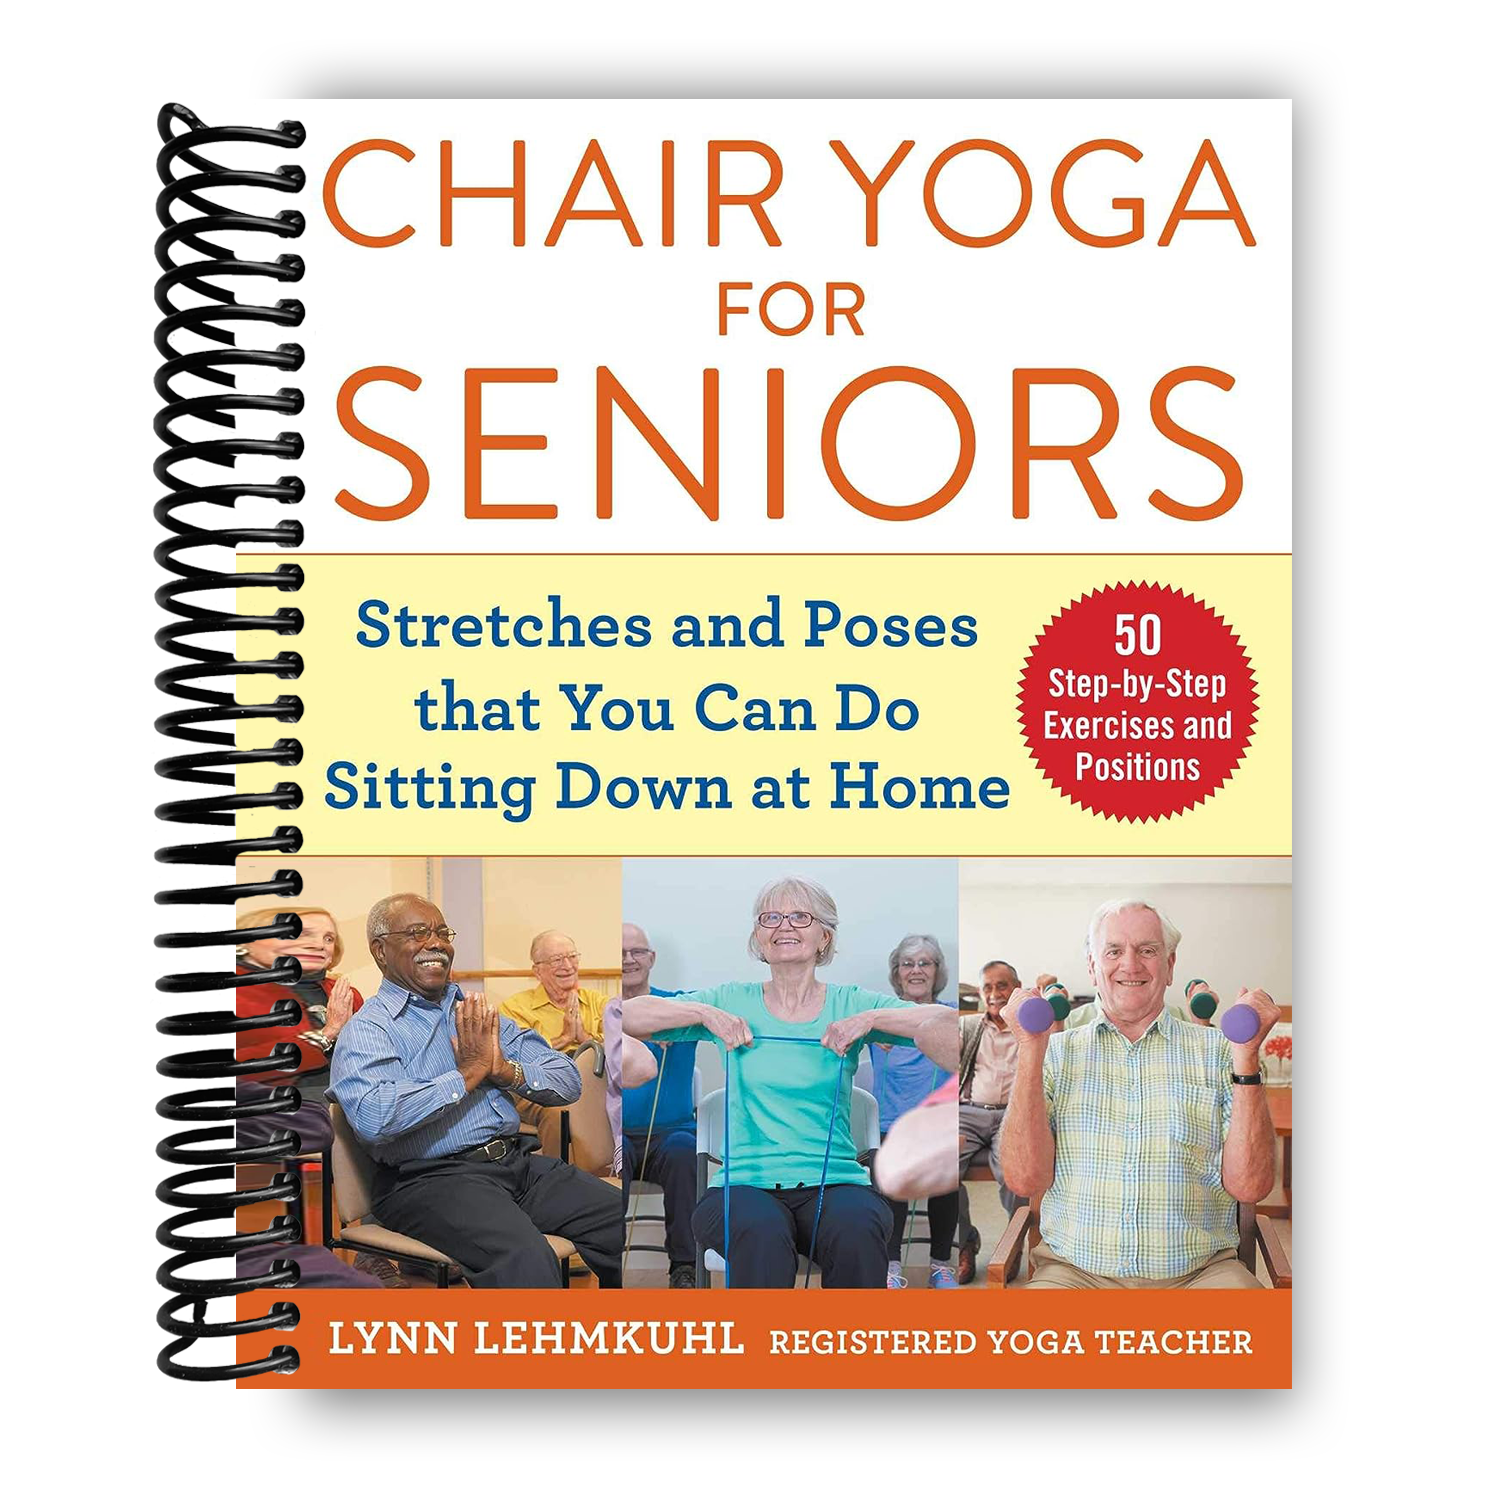 Chair Yoga for Seniors: Stretches and Poses that You Can Do